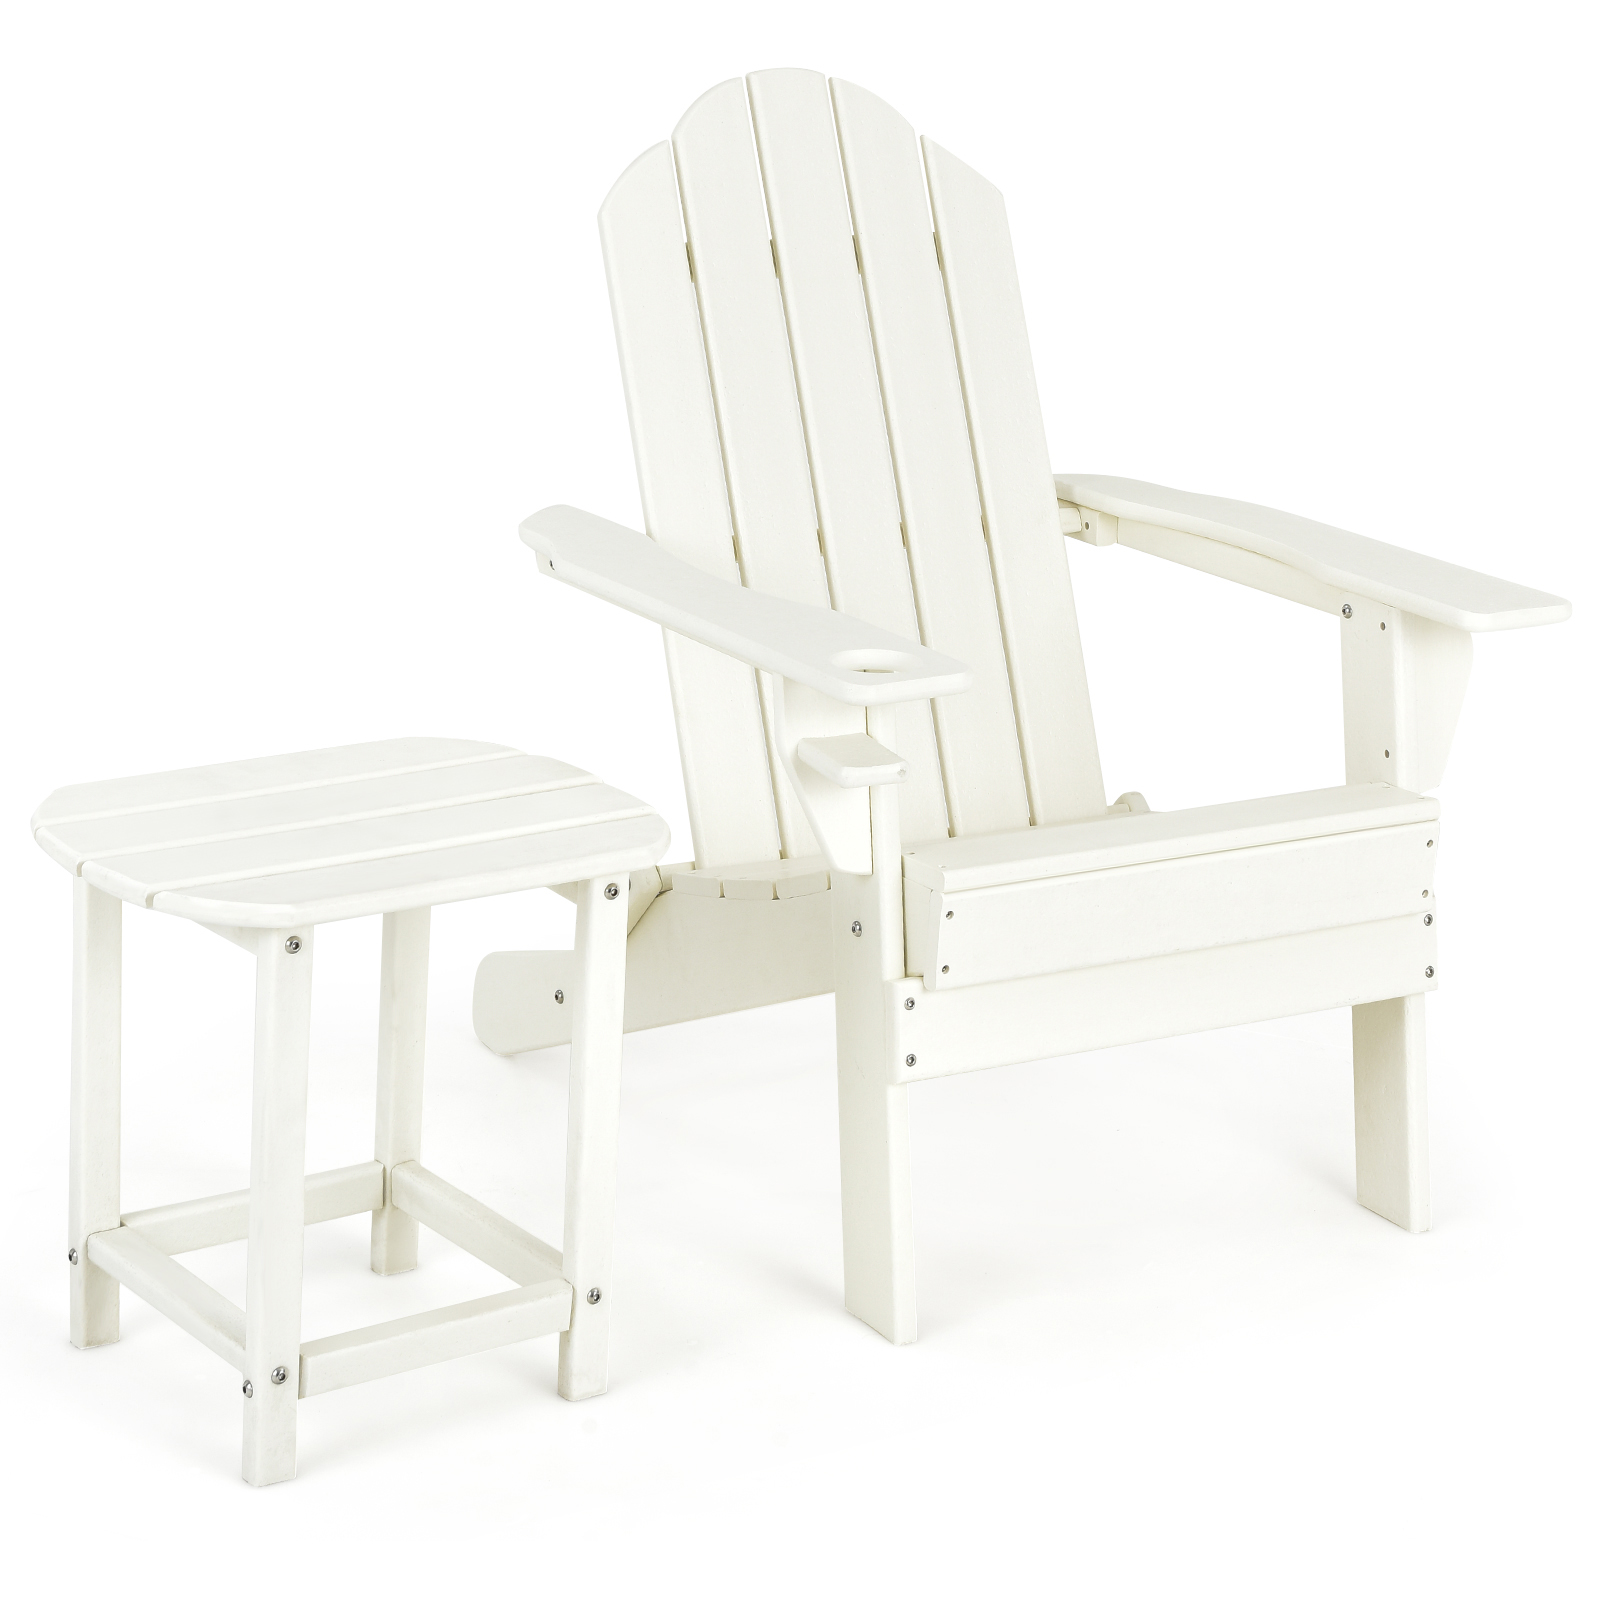 Patiojoy Patio 2PCS Adirondack Chair Side Table Set Outdoor Chair Set with End Table Weather Resistant Cup Holder for Backyard Garden White - image 1 of 8